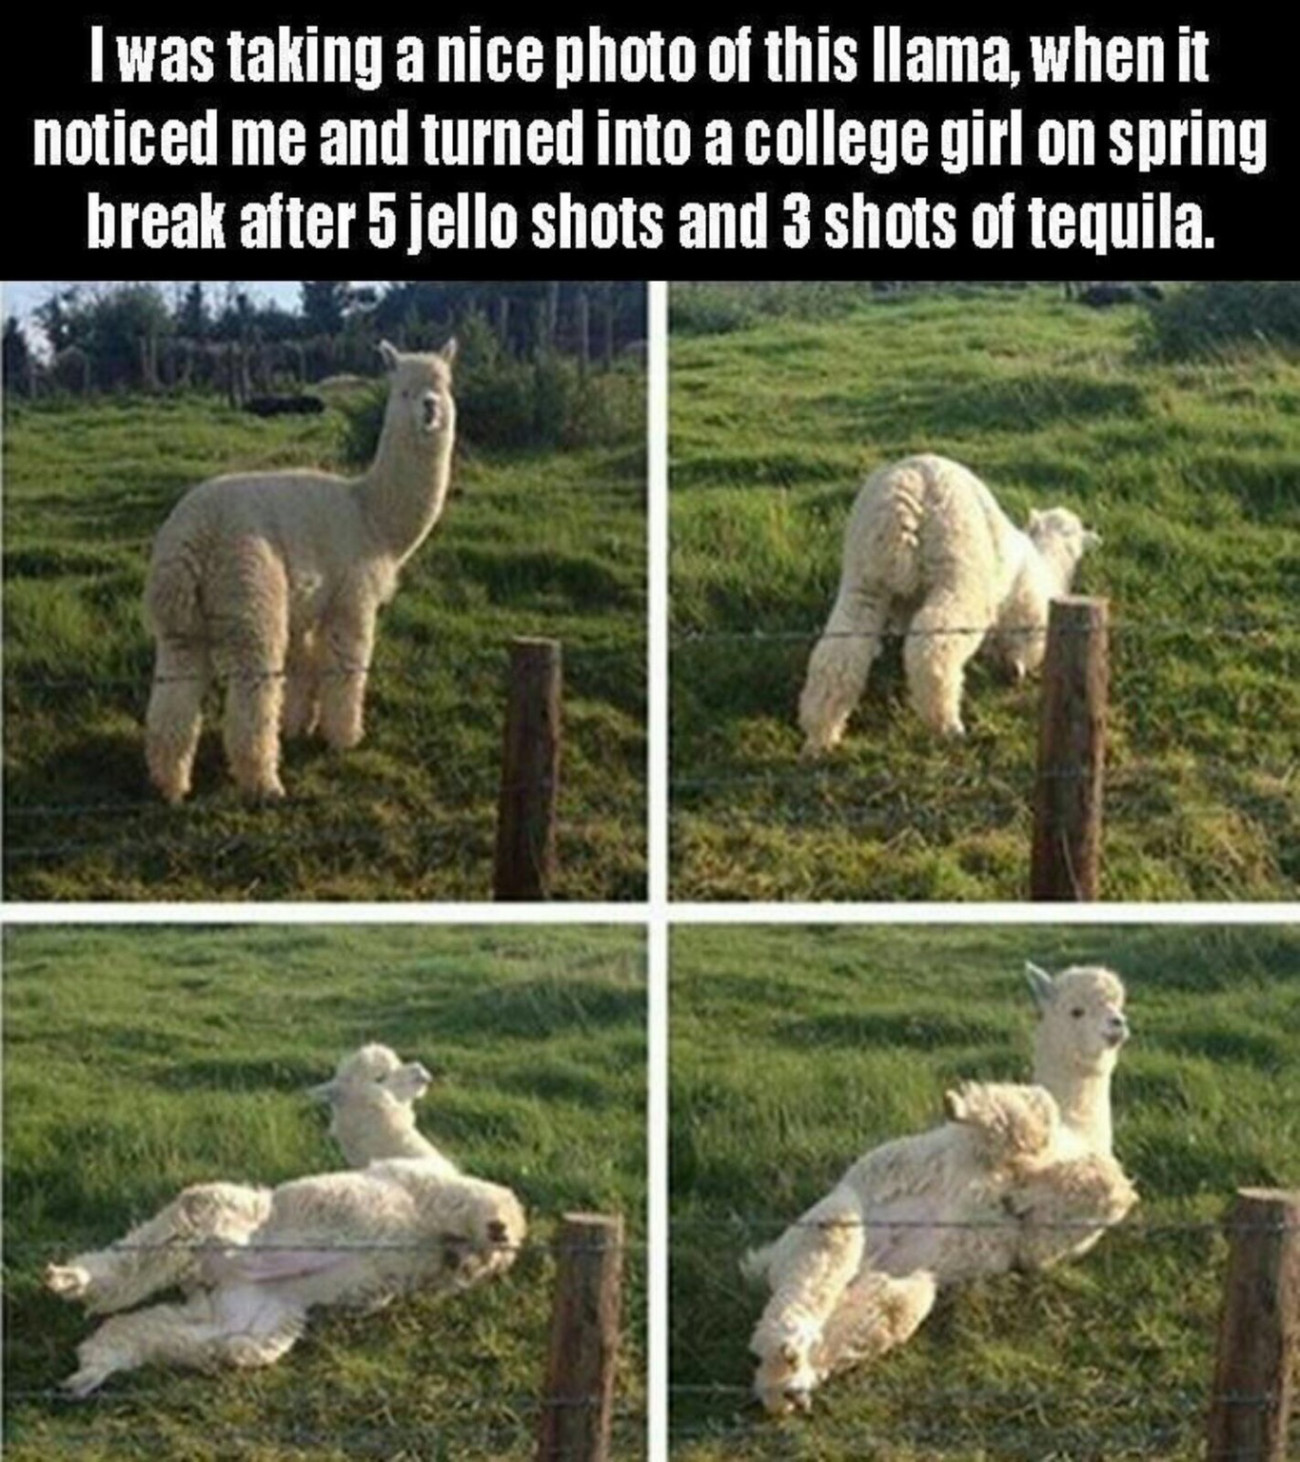 Funny pictures of a Llama that turned into a college girl on spring break after 5 jello shots and 3 shots of tequila